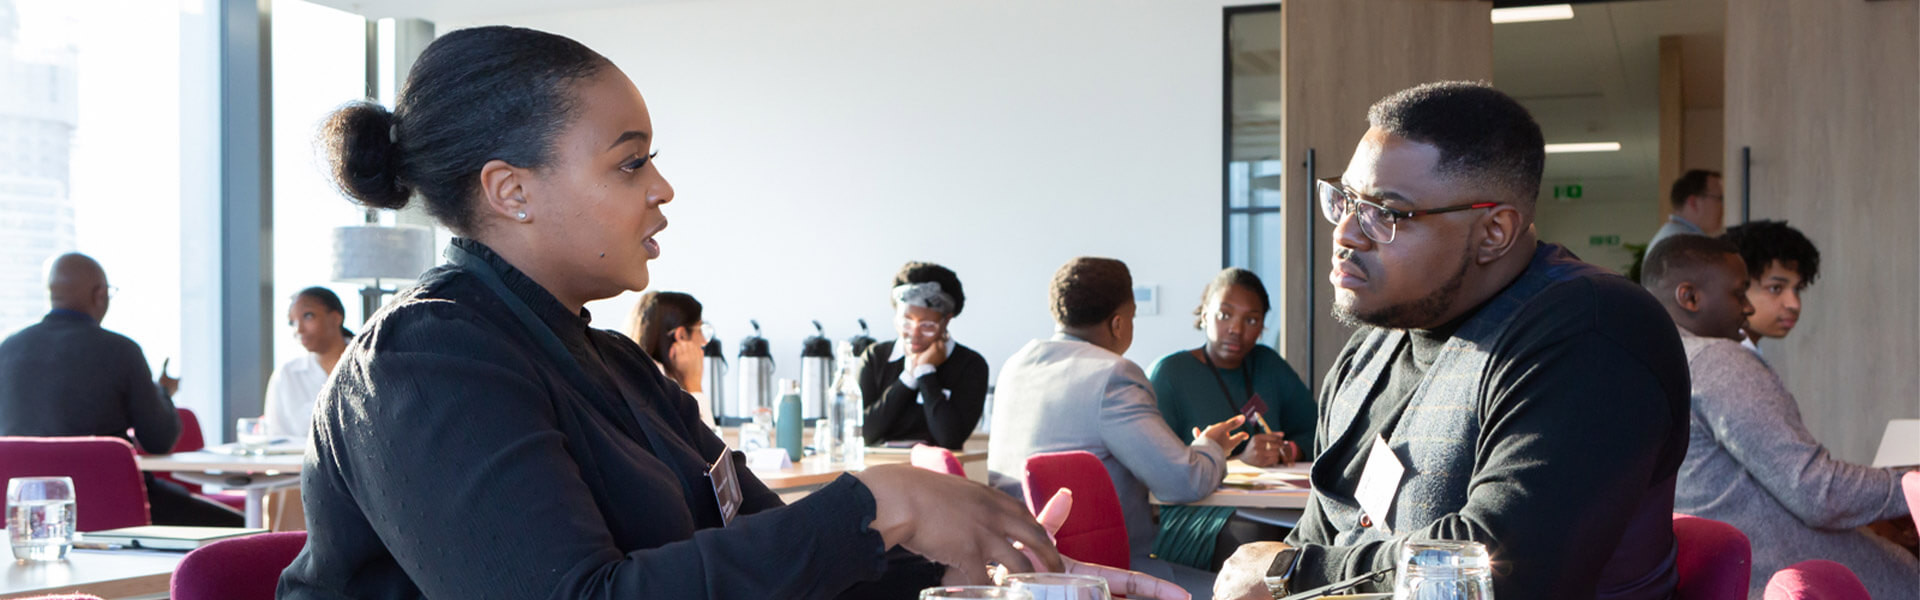 Browne Jacobson officially launches REACH mentoring scheme to support aspiring Black lawyers